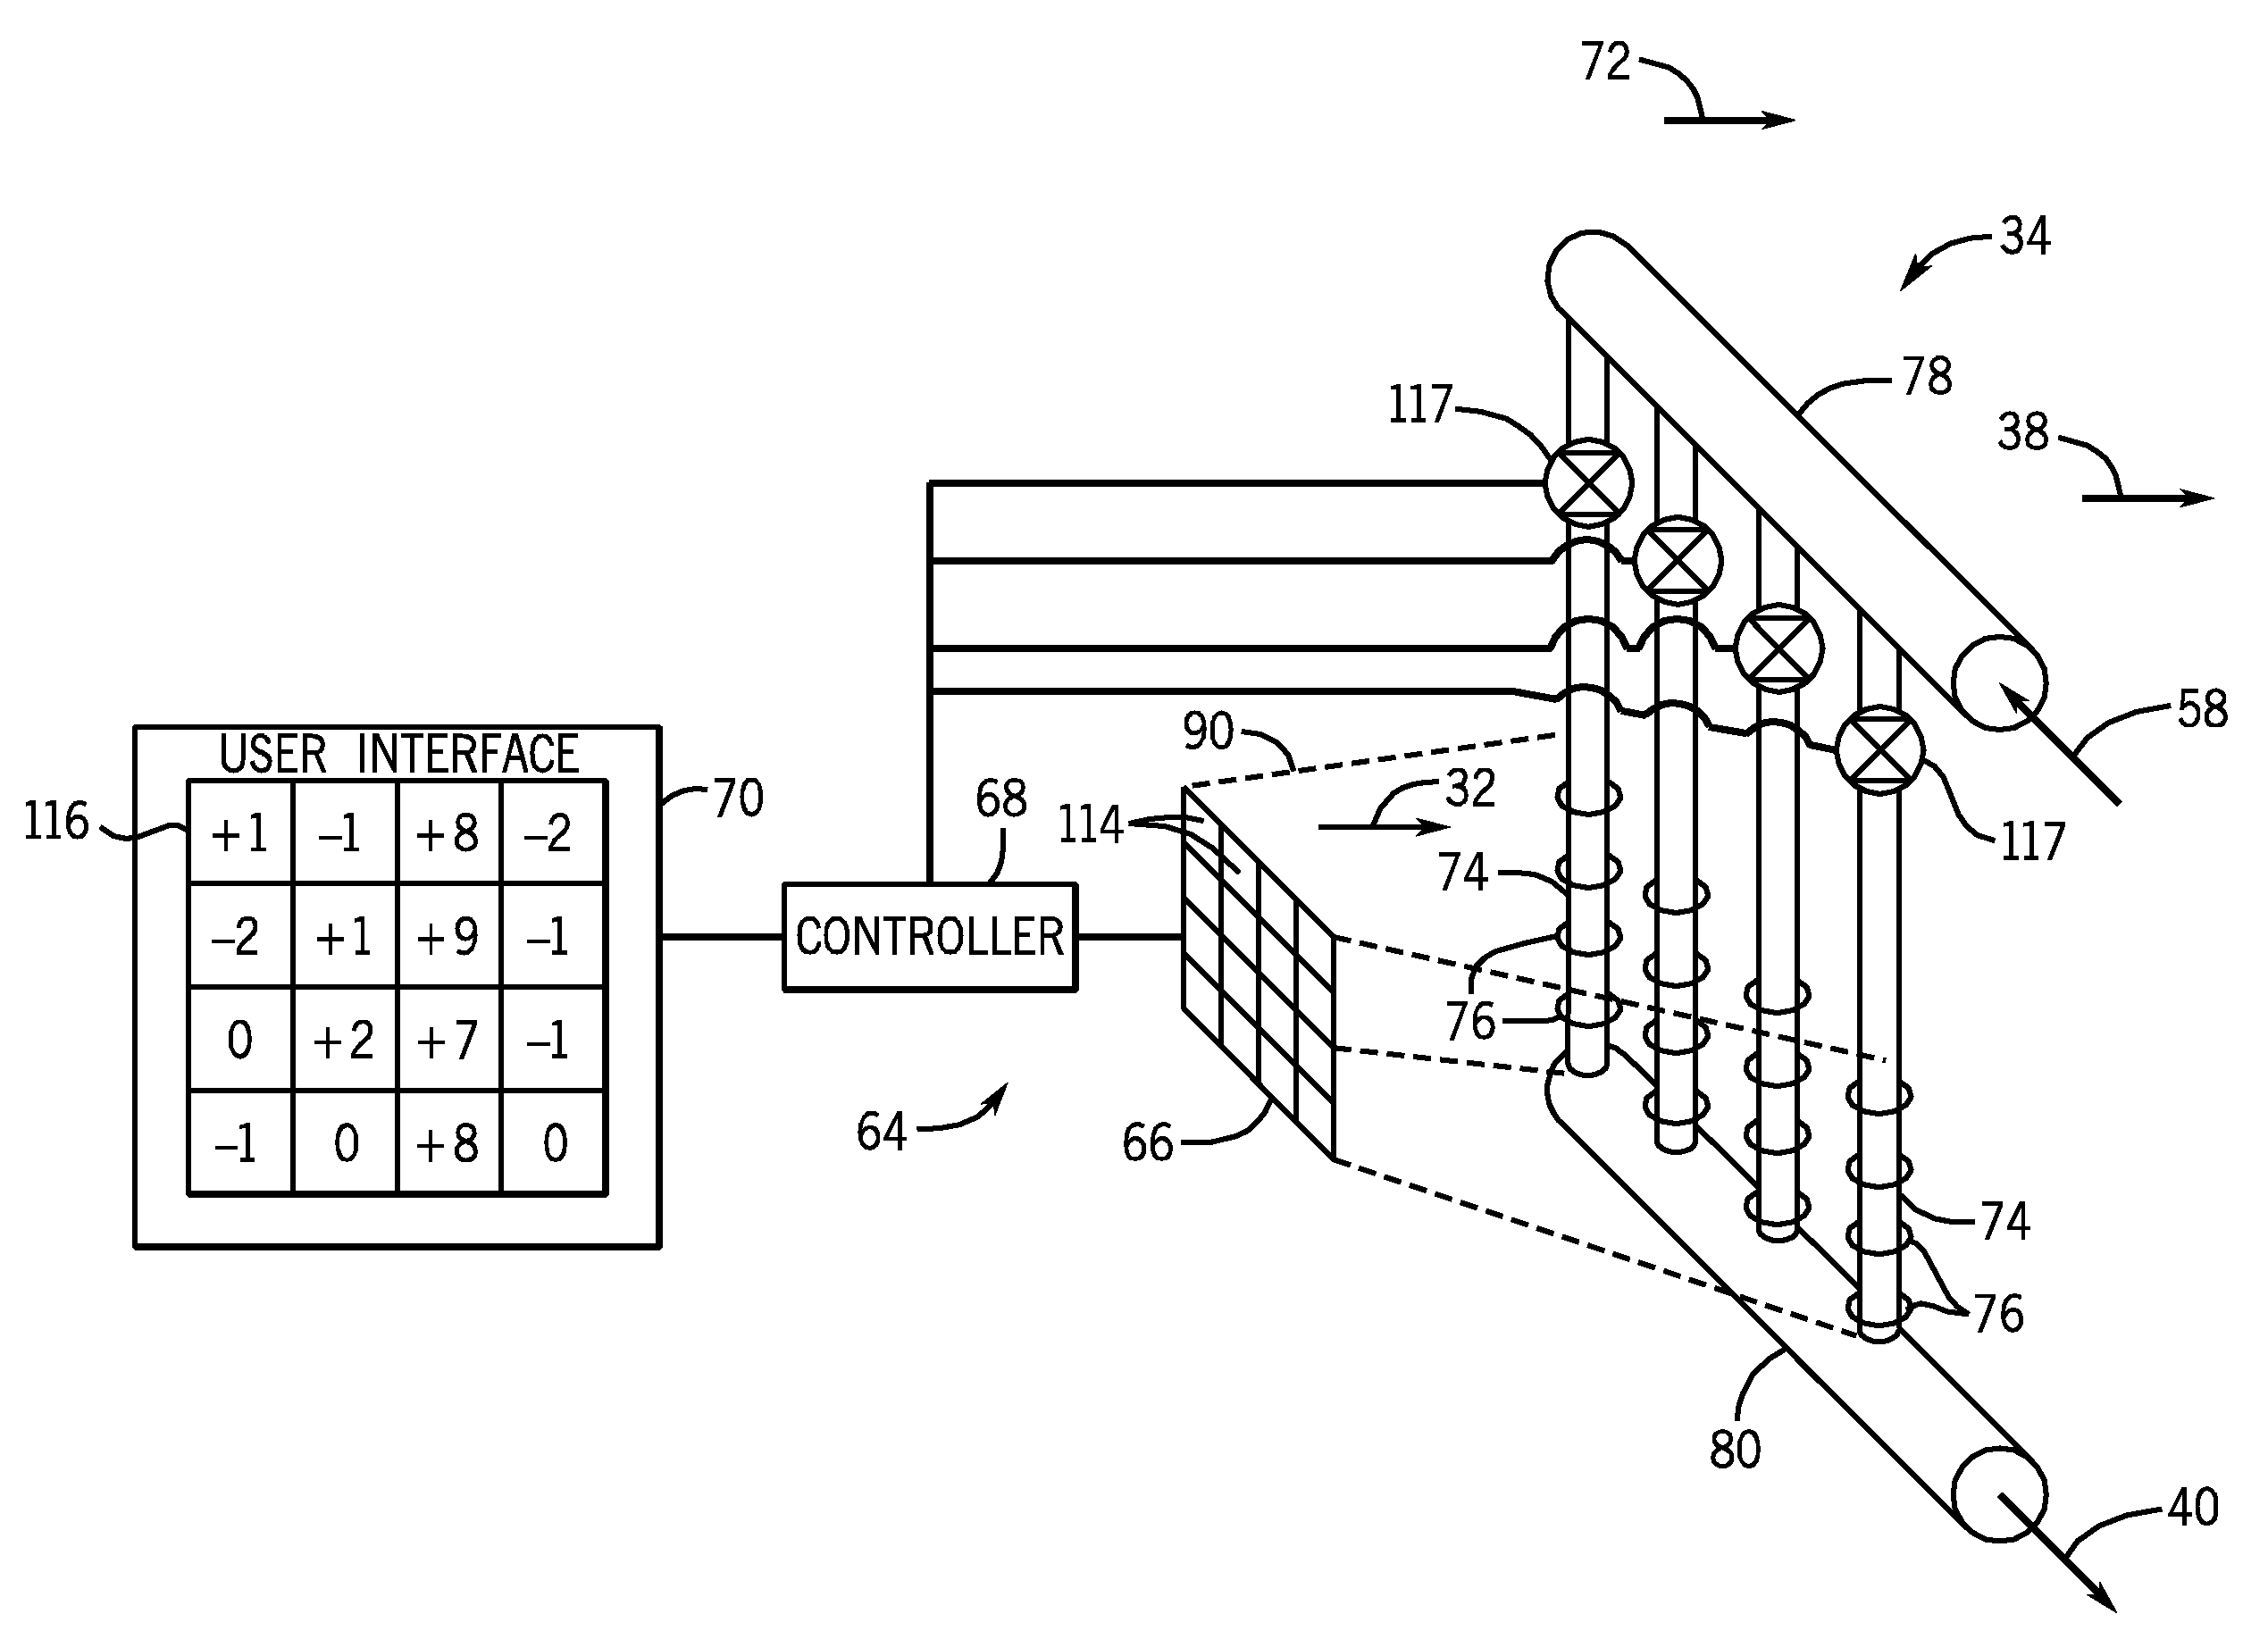 Thermal control system for fault detection and mitigation within a power generation system